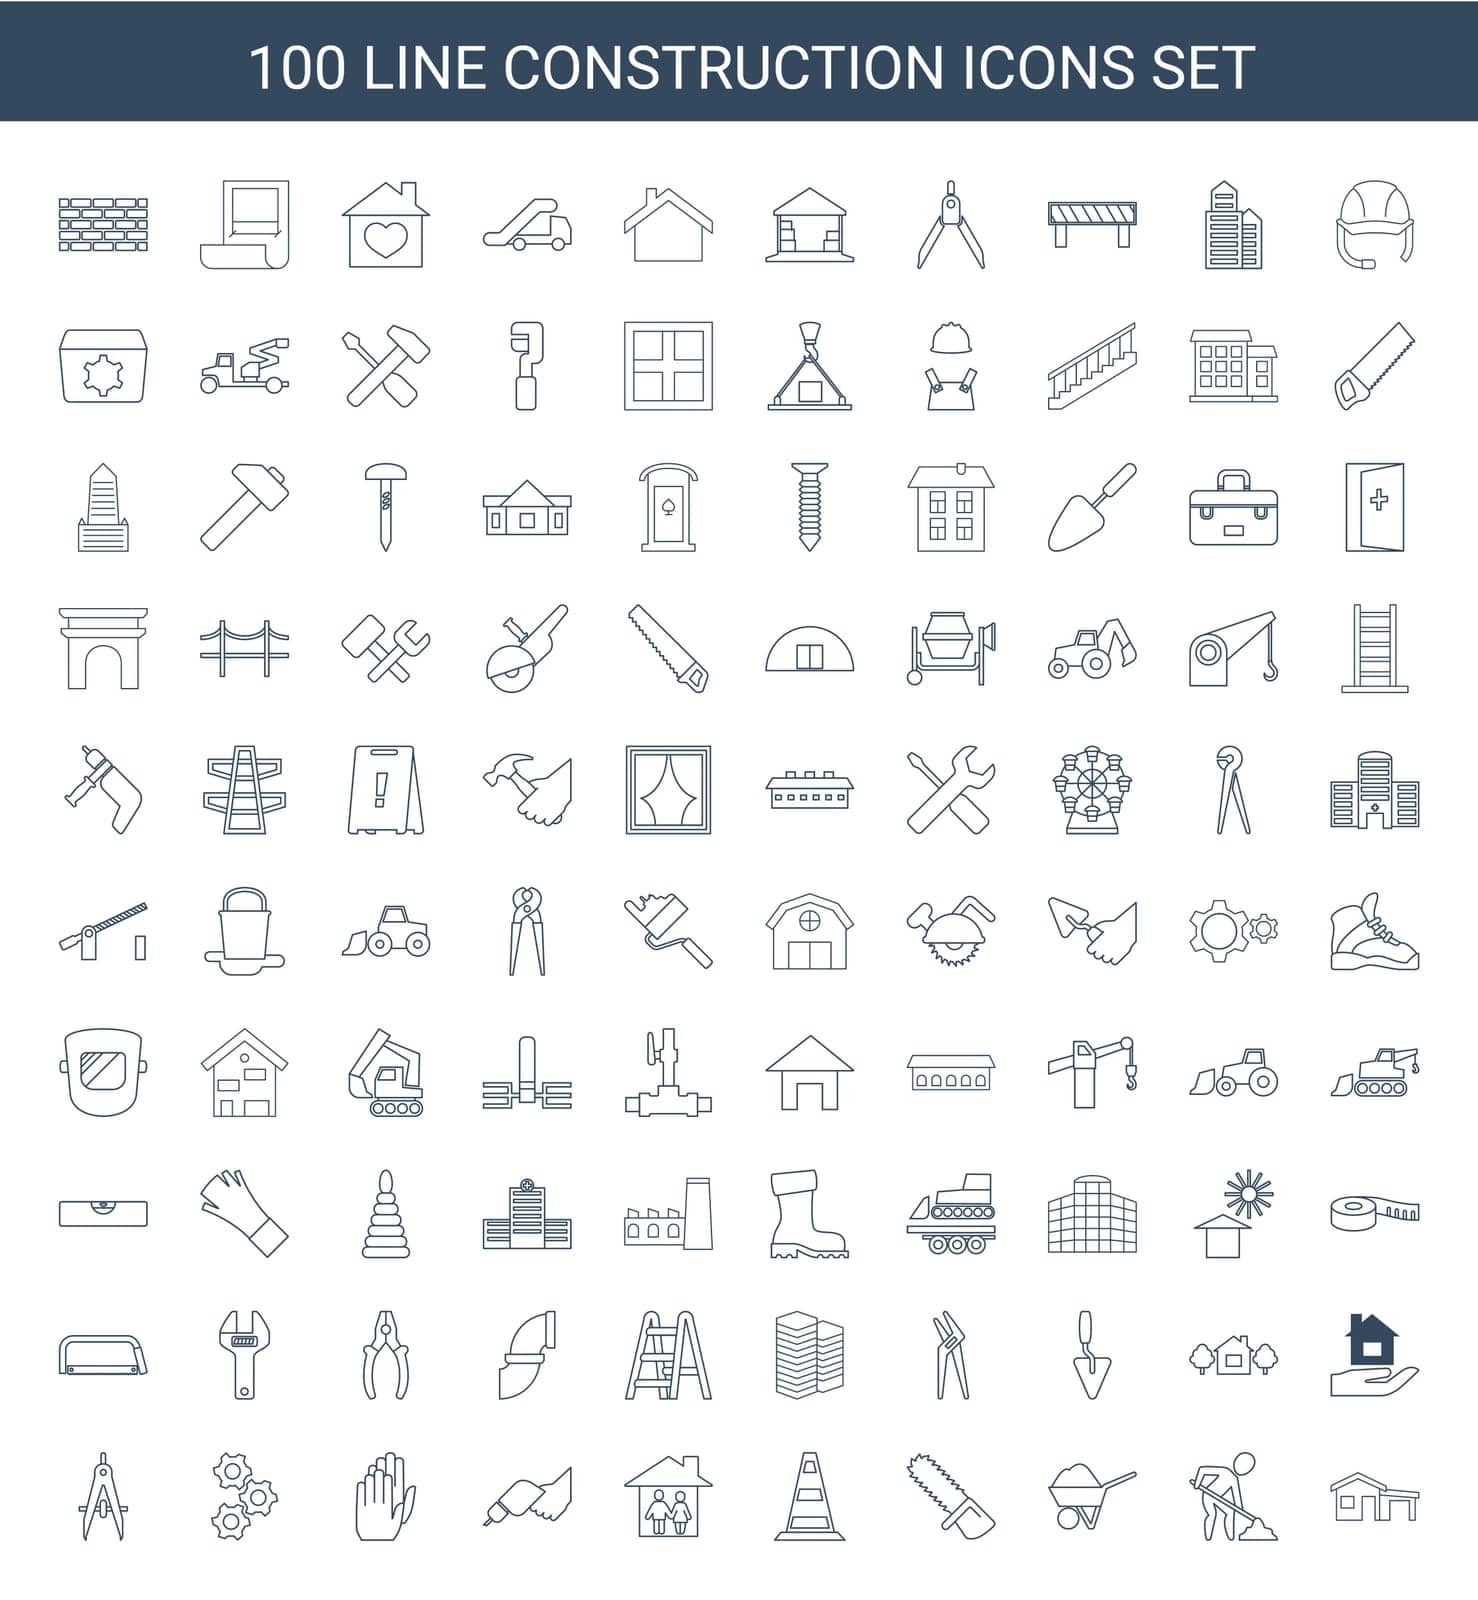 gun,measuring,glove,icon,house,sun,cone,building,gloves,barrier,tape,chainsaw,and,pliers,construction,pipe,vector,man,hacksaw,cargo,hospital,boot,crane,factory,trowel,set,business,nail,tree,centre,digging,home,wrench,ladder,compass,pyramid,family,under,care,gear by ogqcorp